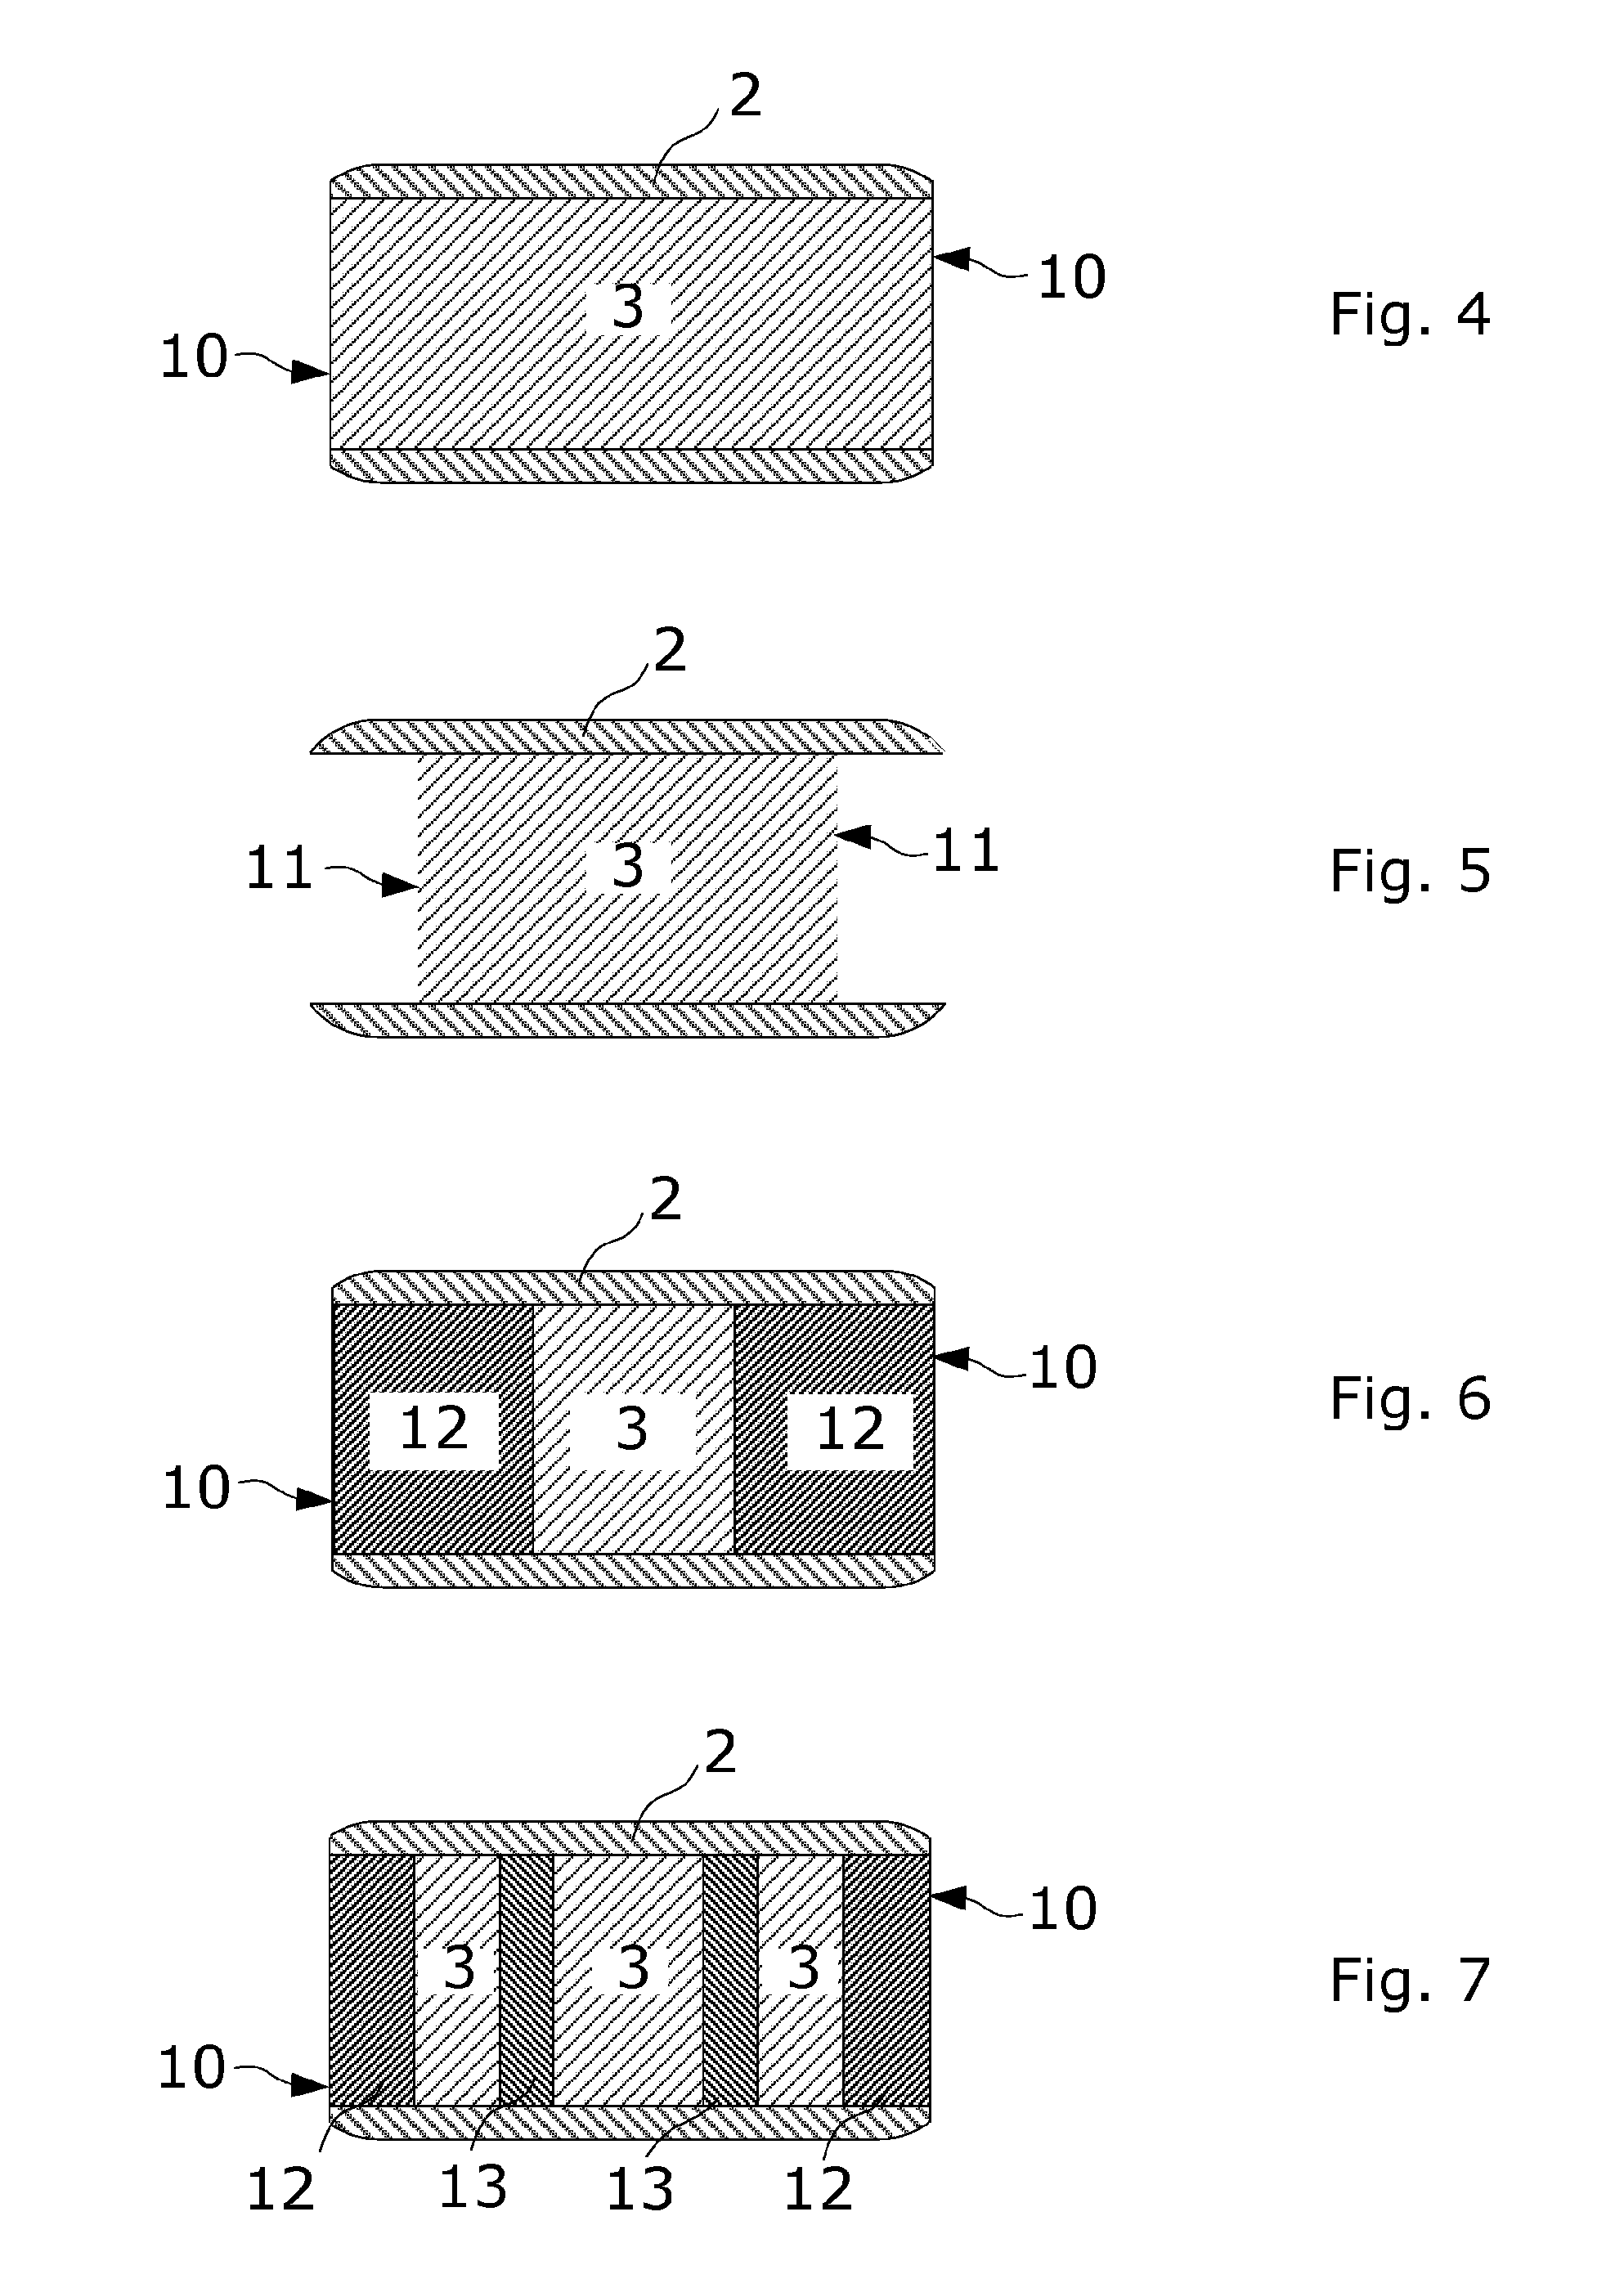 Coated tablets with remaining degradation surface over the time